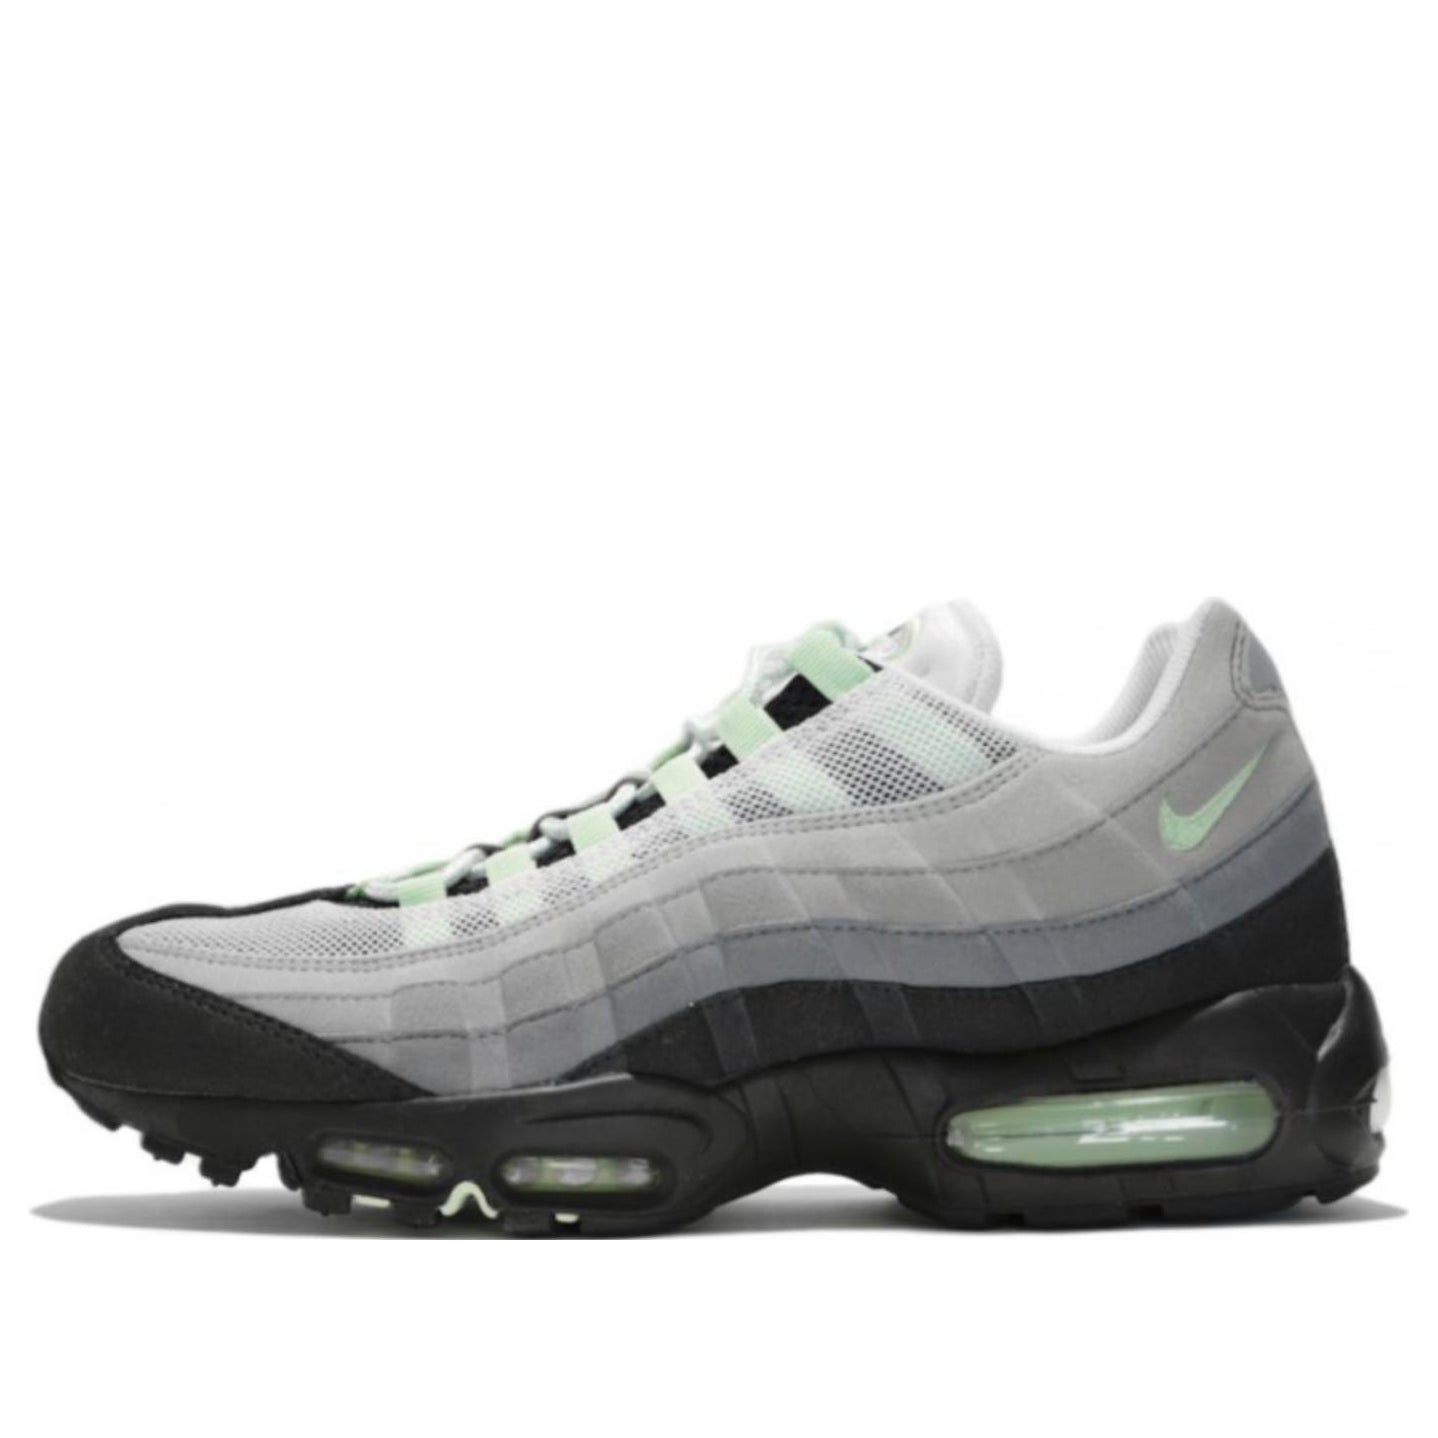 Air Max 95 'New Green' White/Nw Grn-Ntrl Gry-Mdm Gry 609048-136 sneakmarks